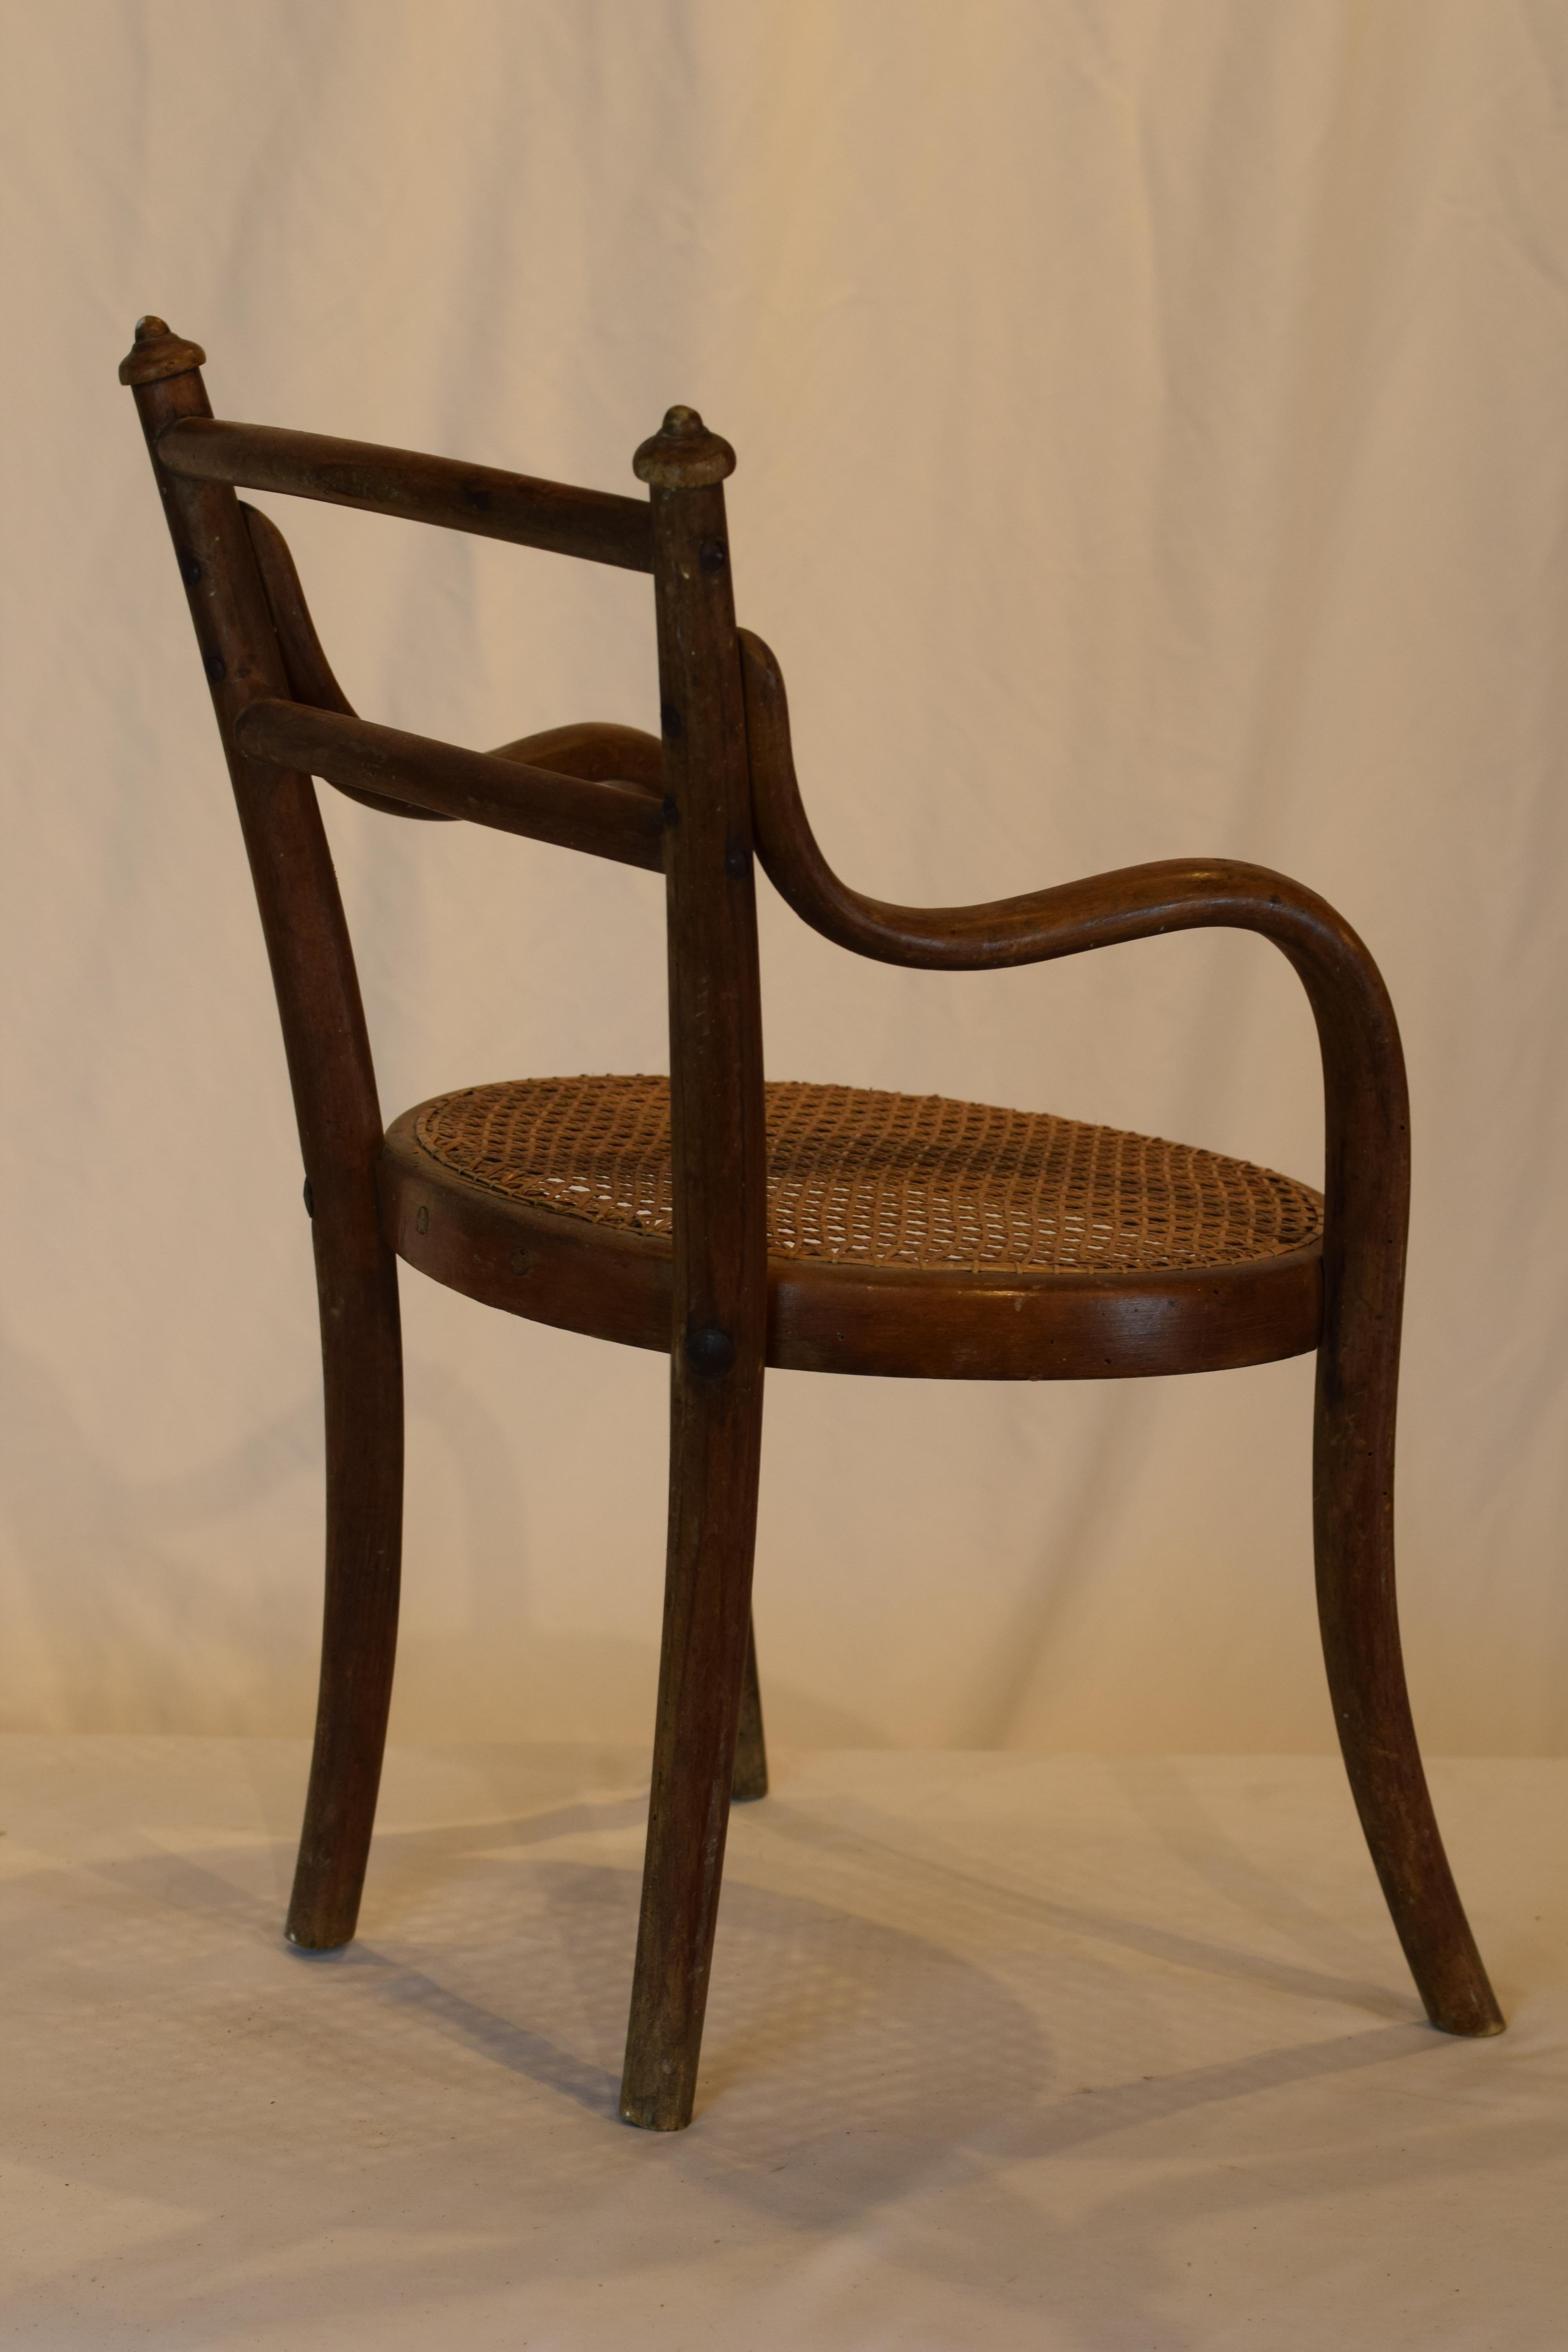 A truly wonderful child's bentwood and cane chair from France. Handmade with a cane seat, this would delight any child wanting his 'own chair' and would be charming just sitting alone beside the hearth. Beautiful bentwood and cane, this lovely piece